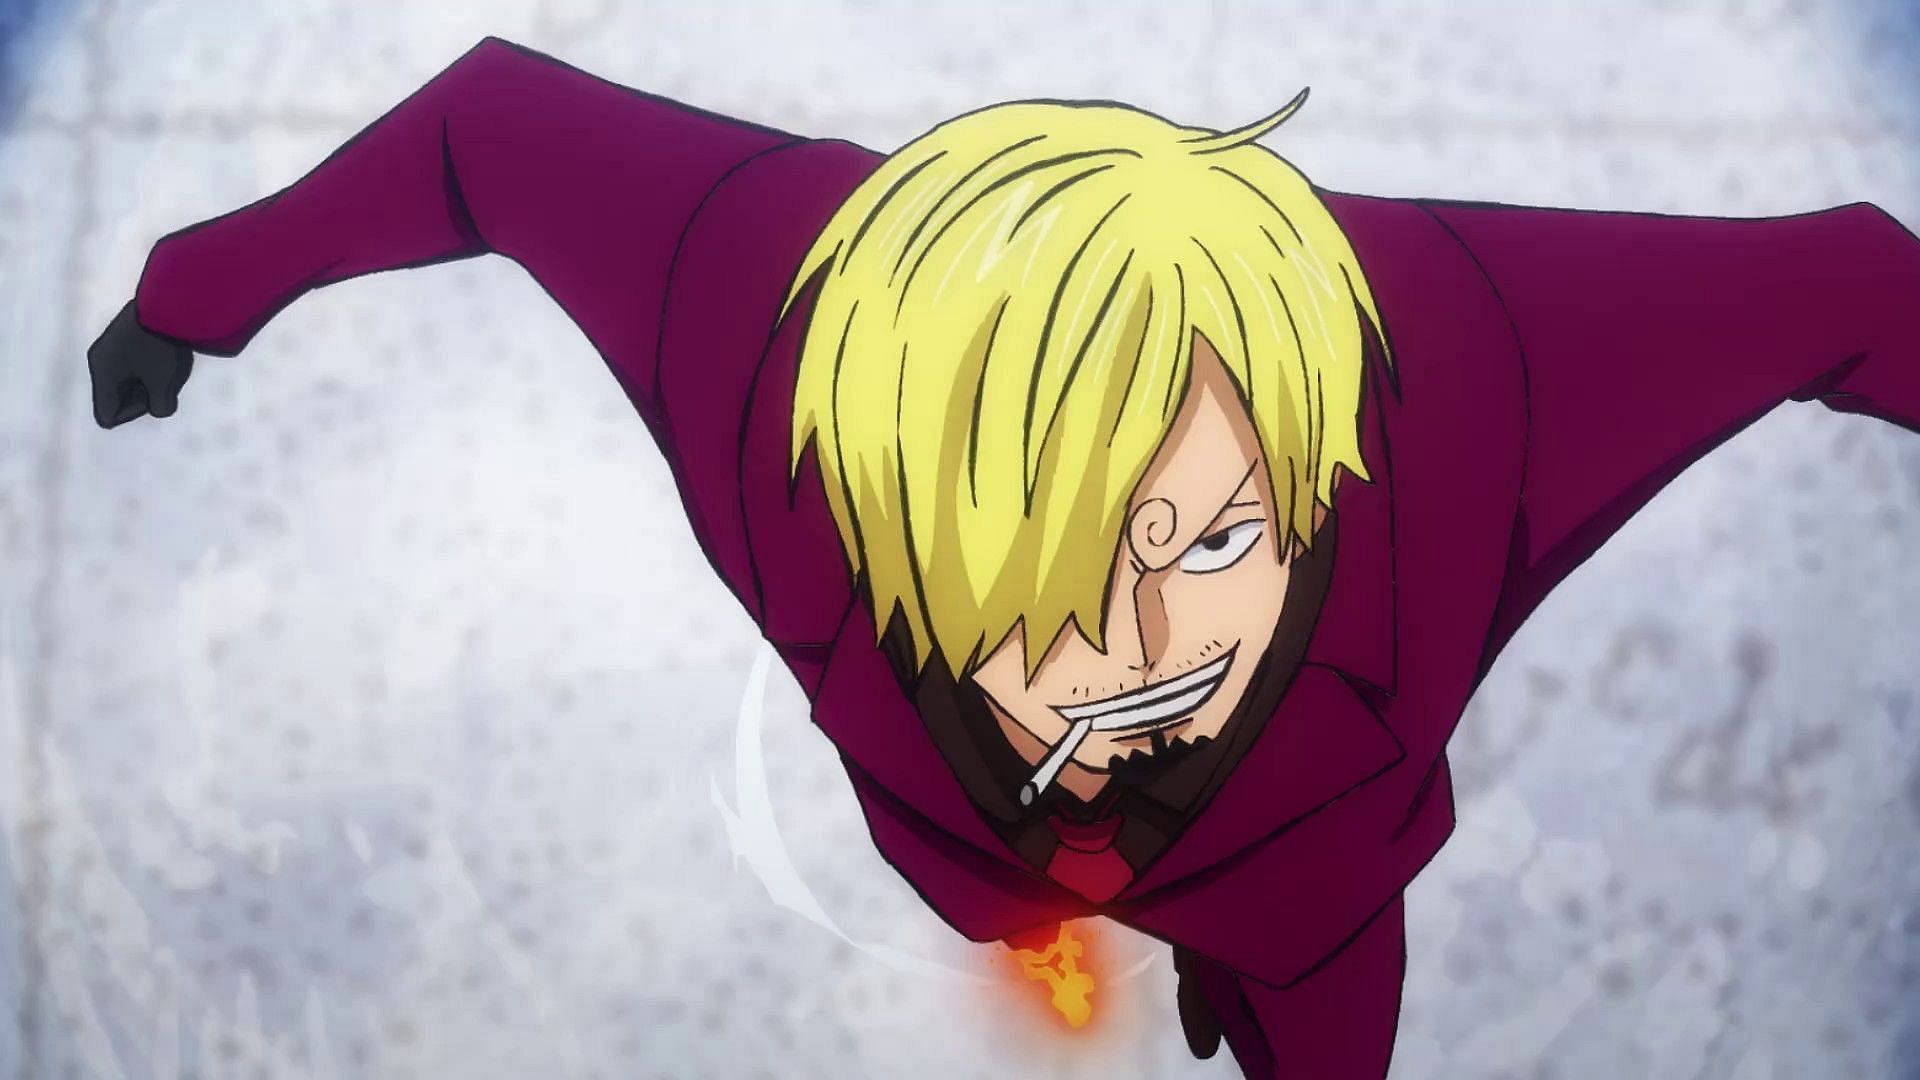 Fans are confused on why Sanji would destroy his greatest weapon in the middle of his biggest fight, but there